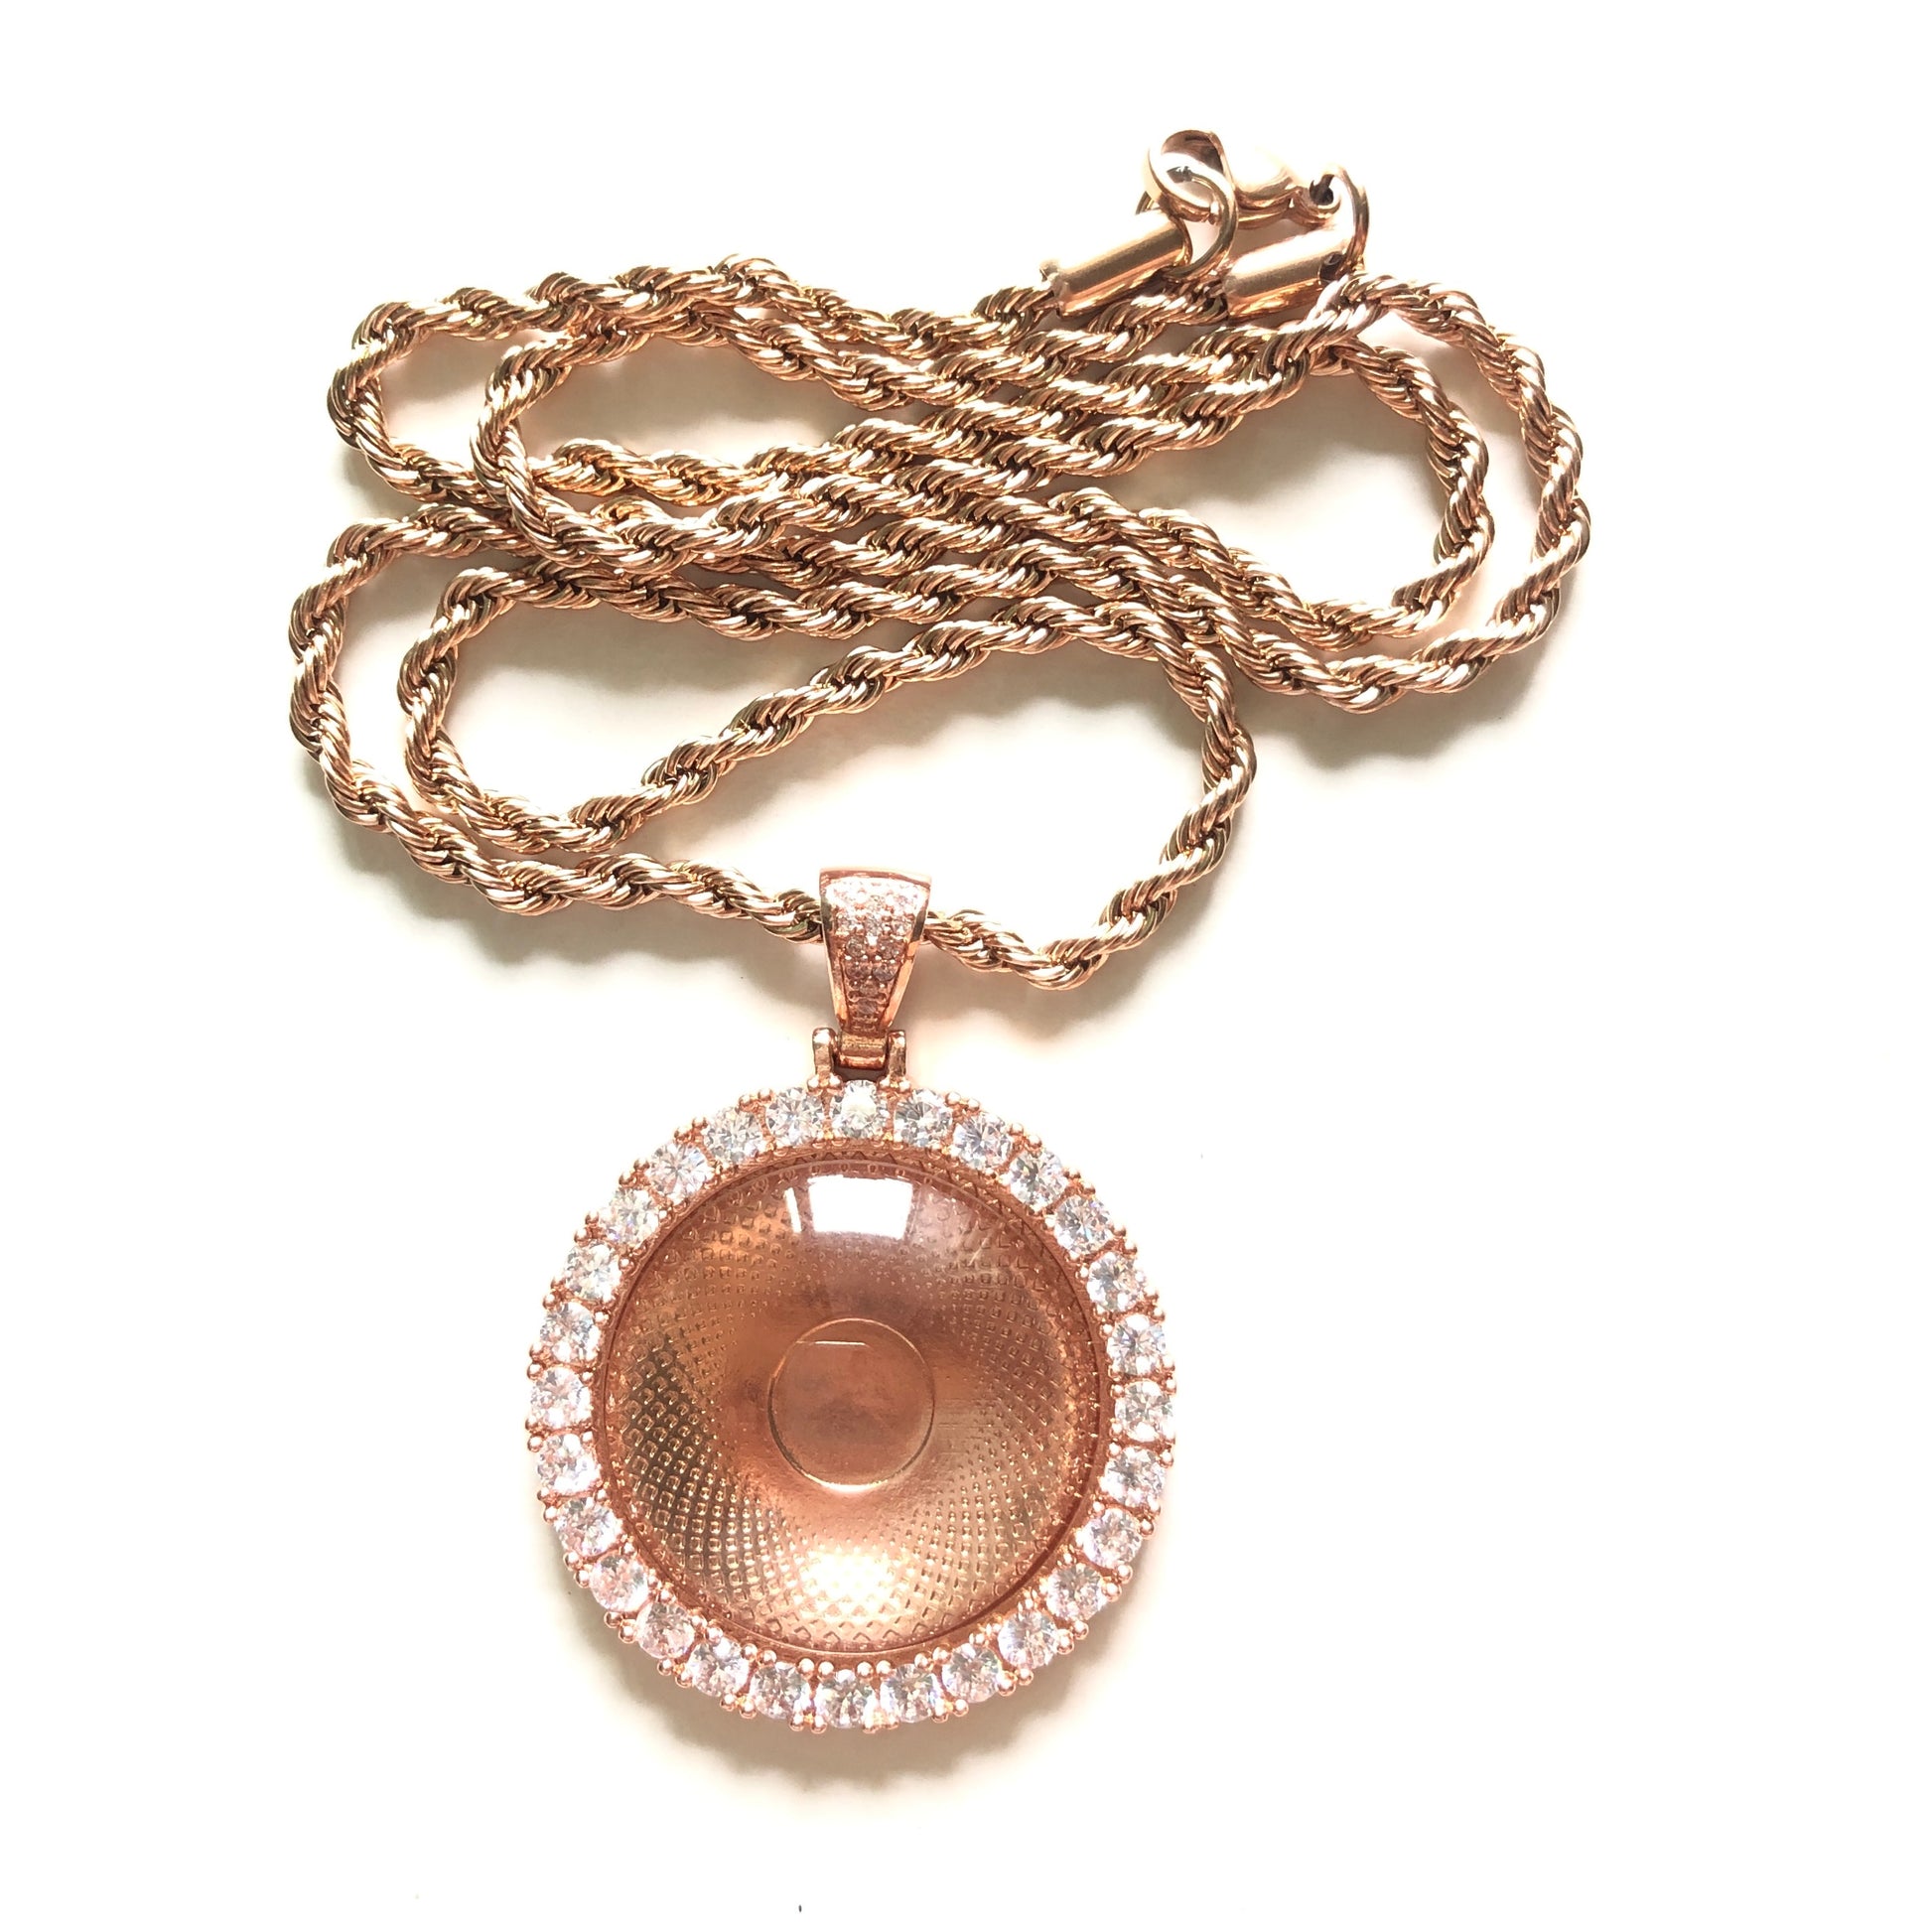 5pcs/lot 45*34mm CZ Paved Copper Photo Tray Necklace Rose Gold Necklaces Charms Beads Beyond